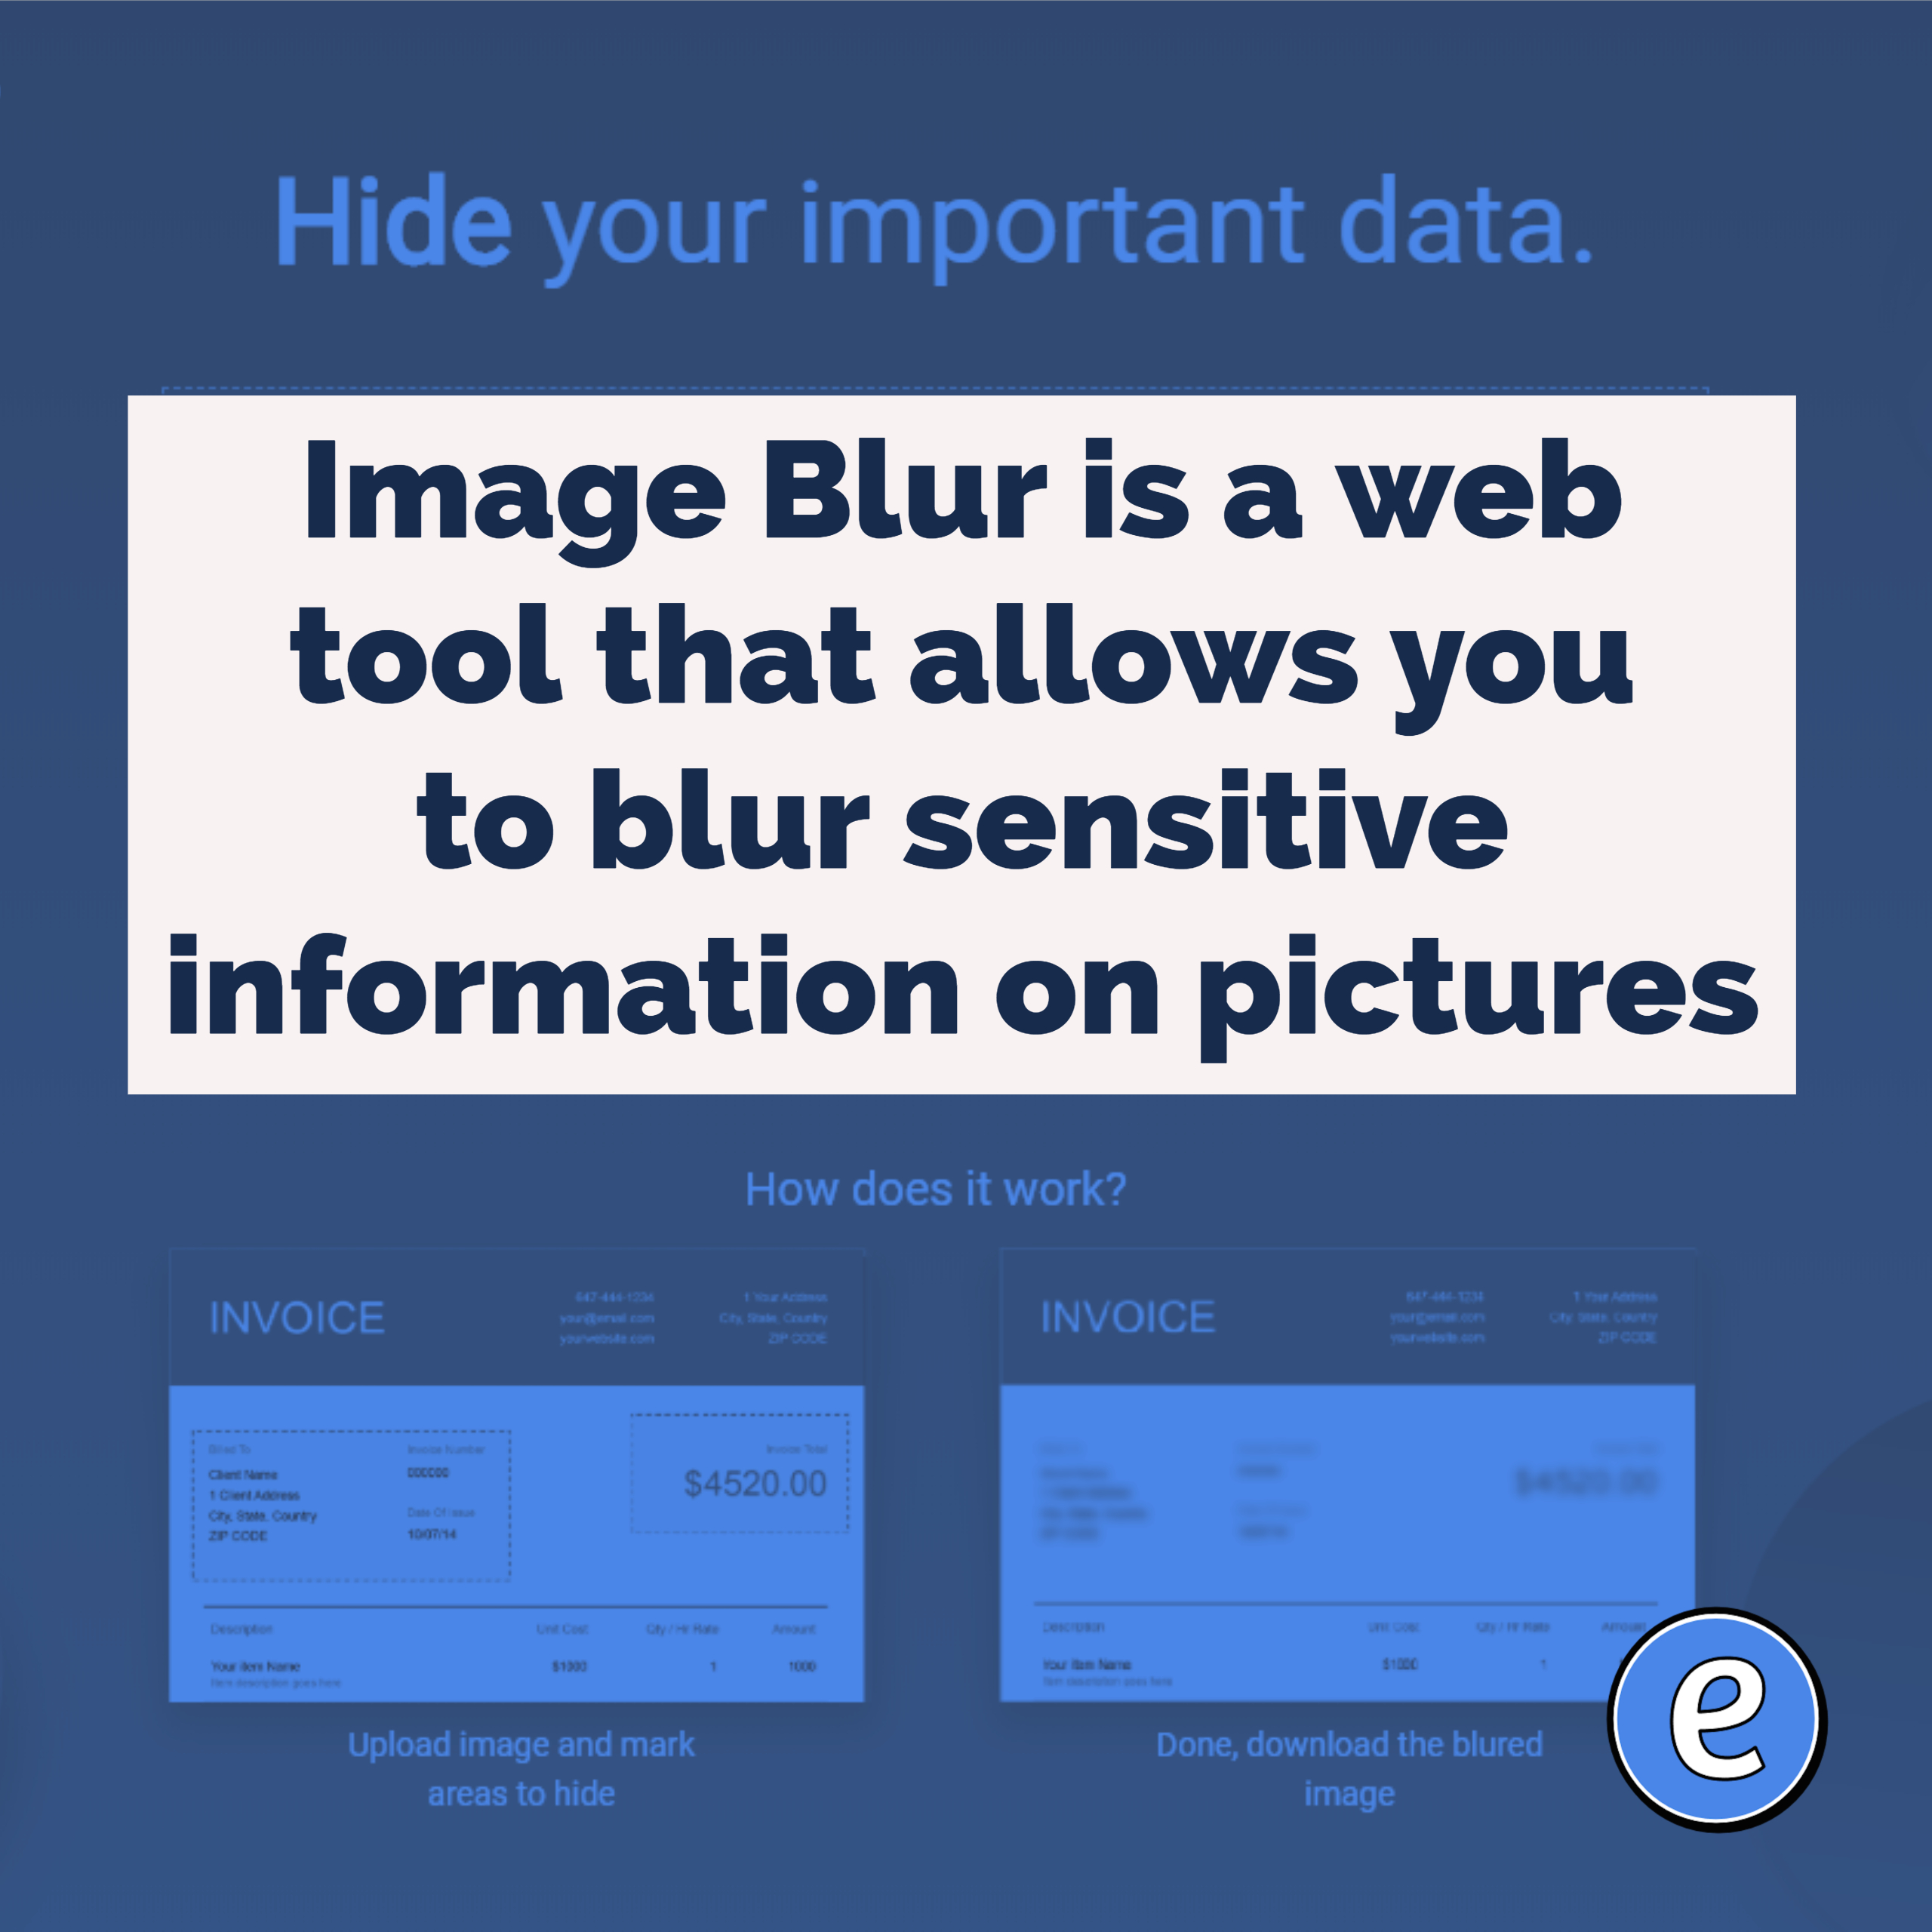 Image Blur is a web tool that allows you to blur sensitive information on pictures